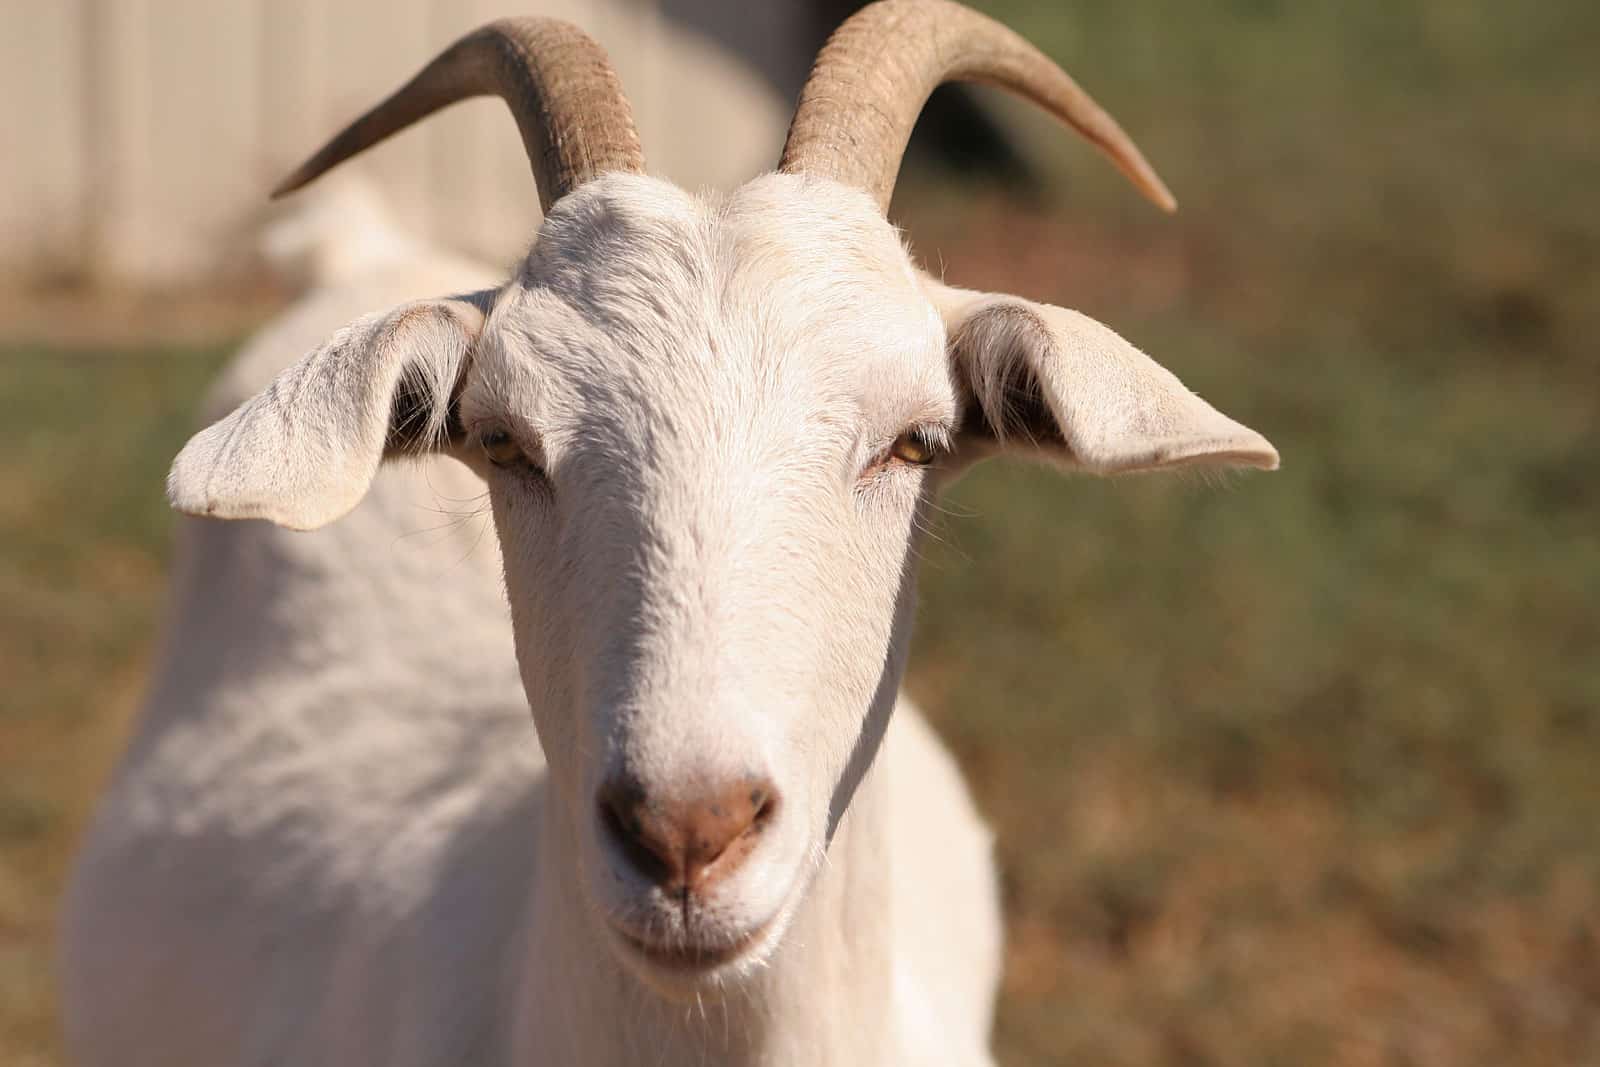 AMTS Announces Opportunity to Trial Small Ruminants